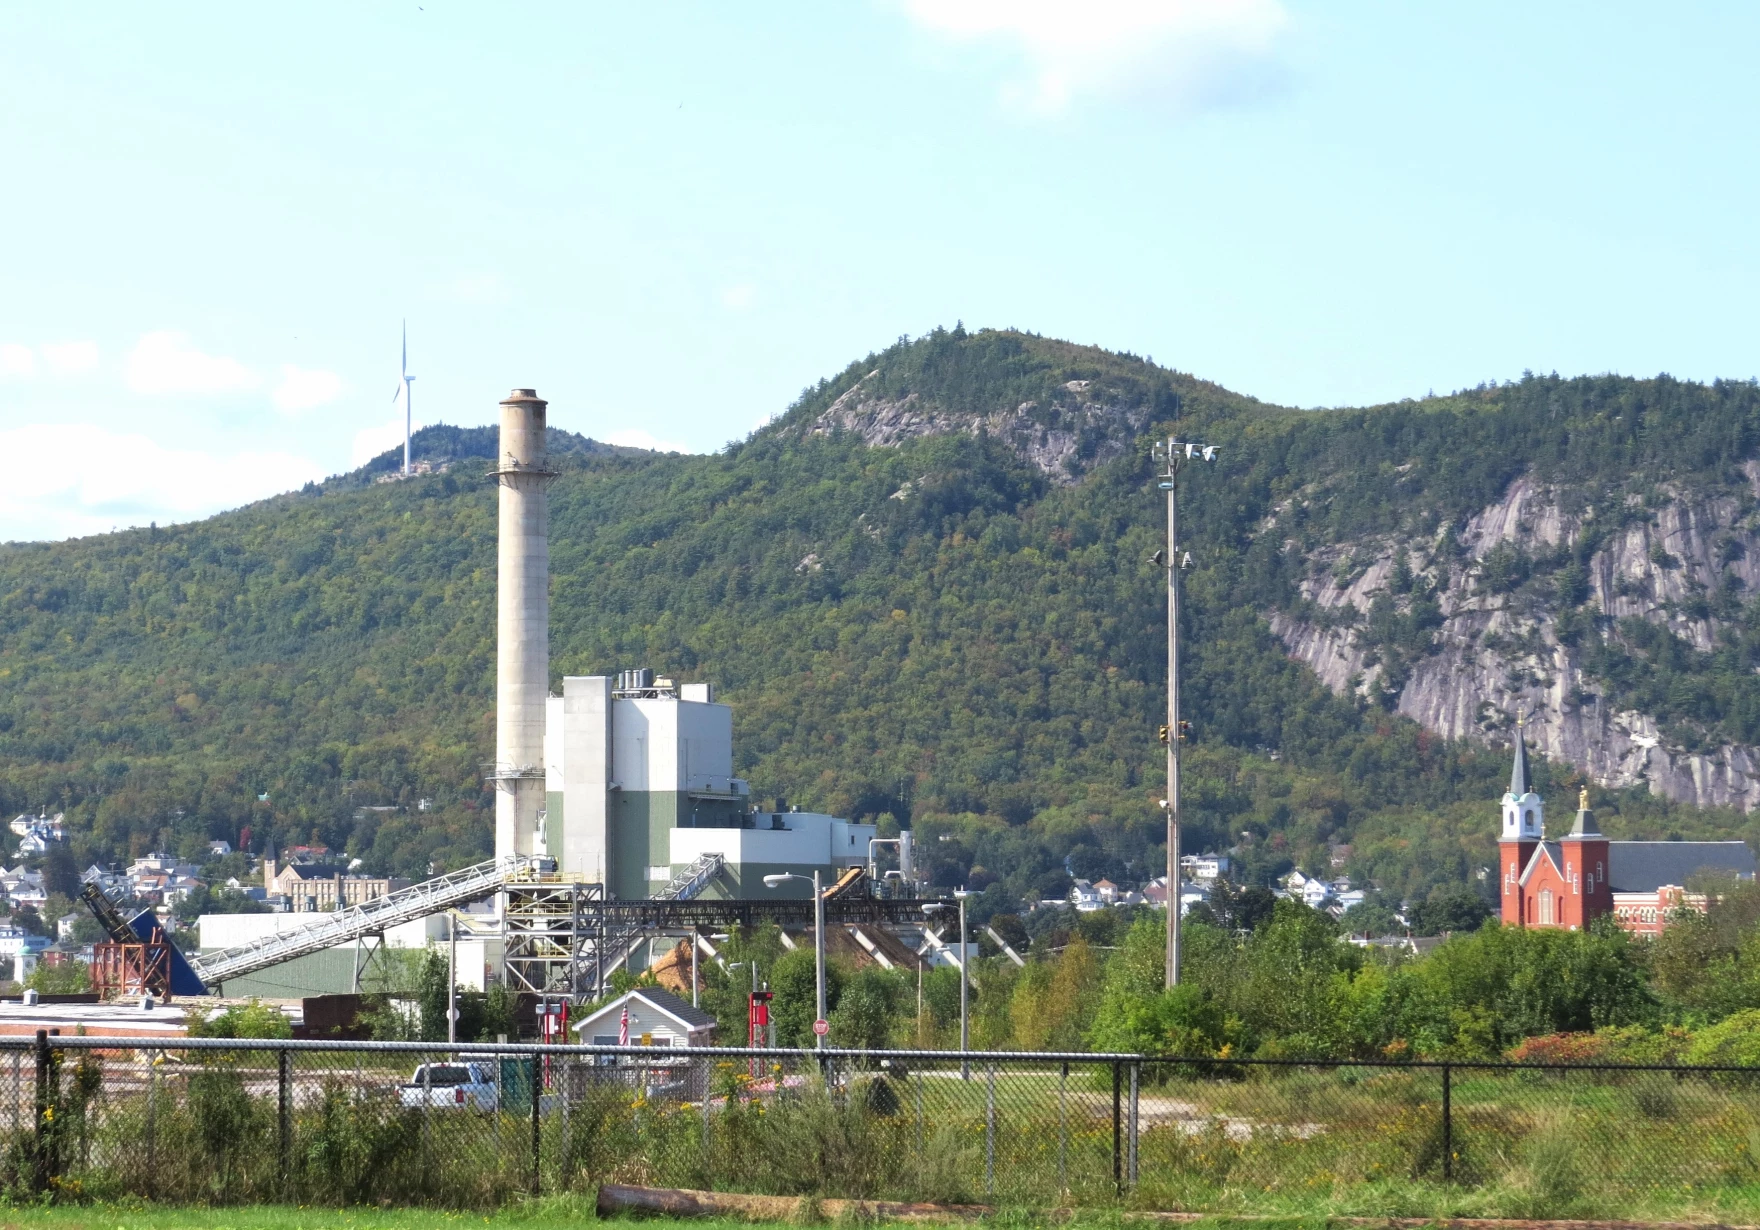 Burgess BioPower Files for Bankruptcy, Terminating Contract With Eversource